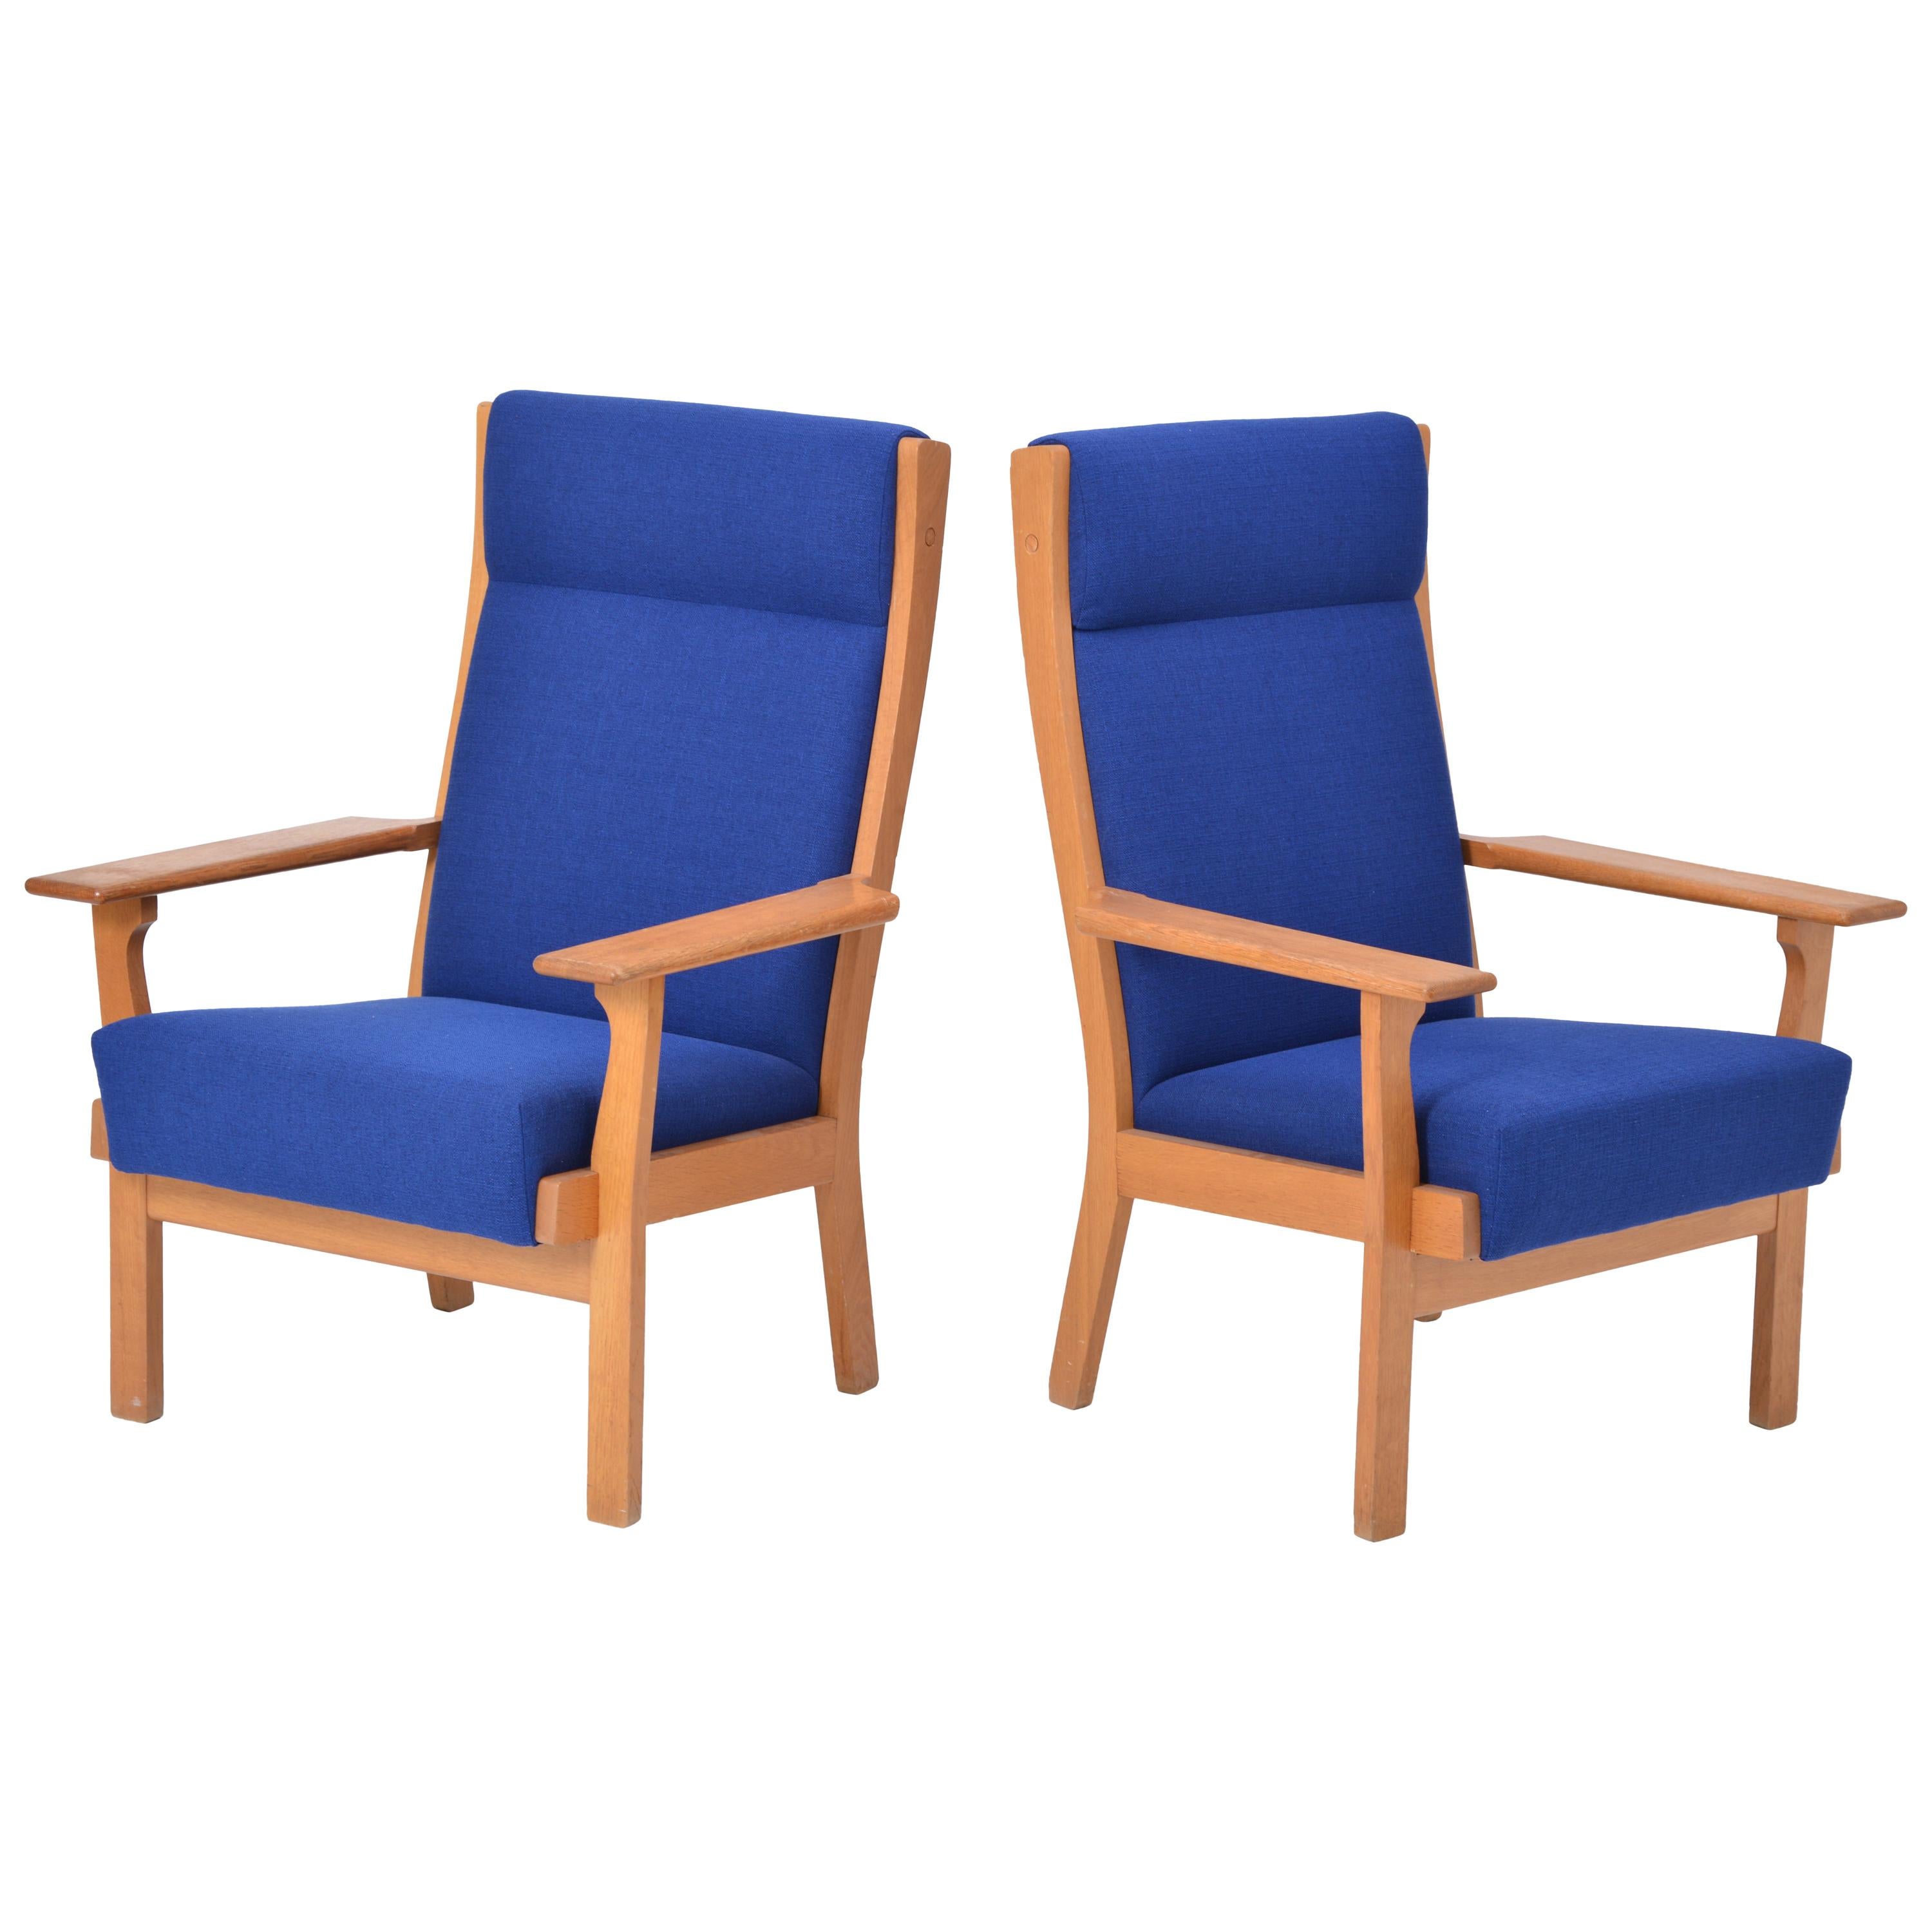 Set of Two Danish Mid-Century Modern GE 181 A chairs by Hans Wegner for GETAMA